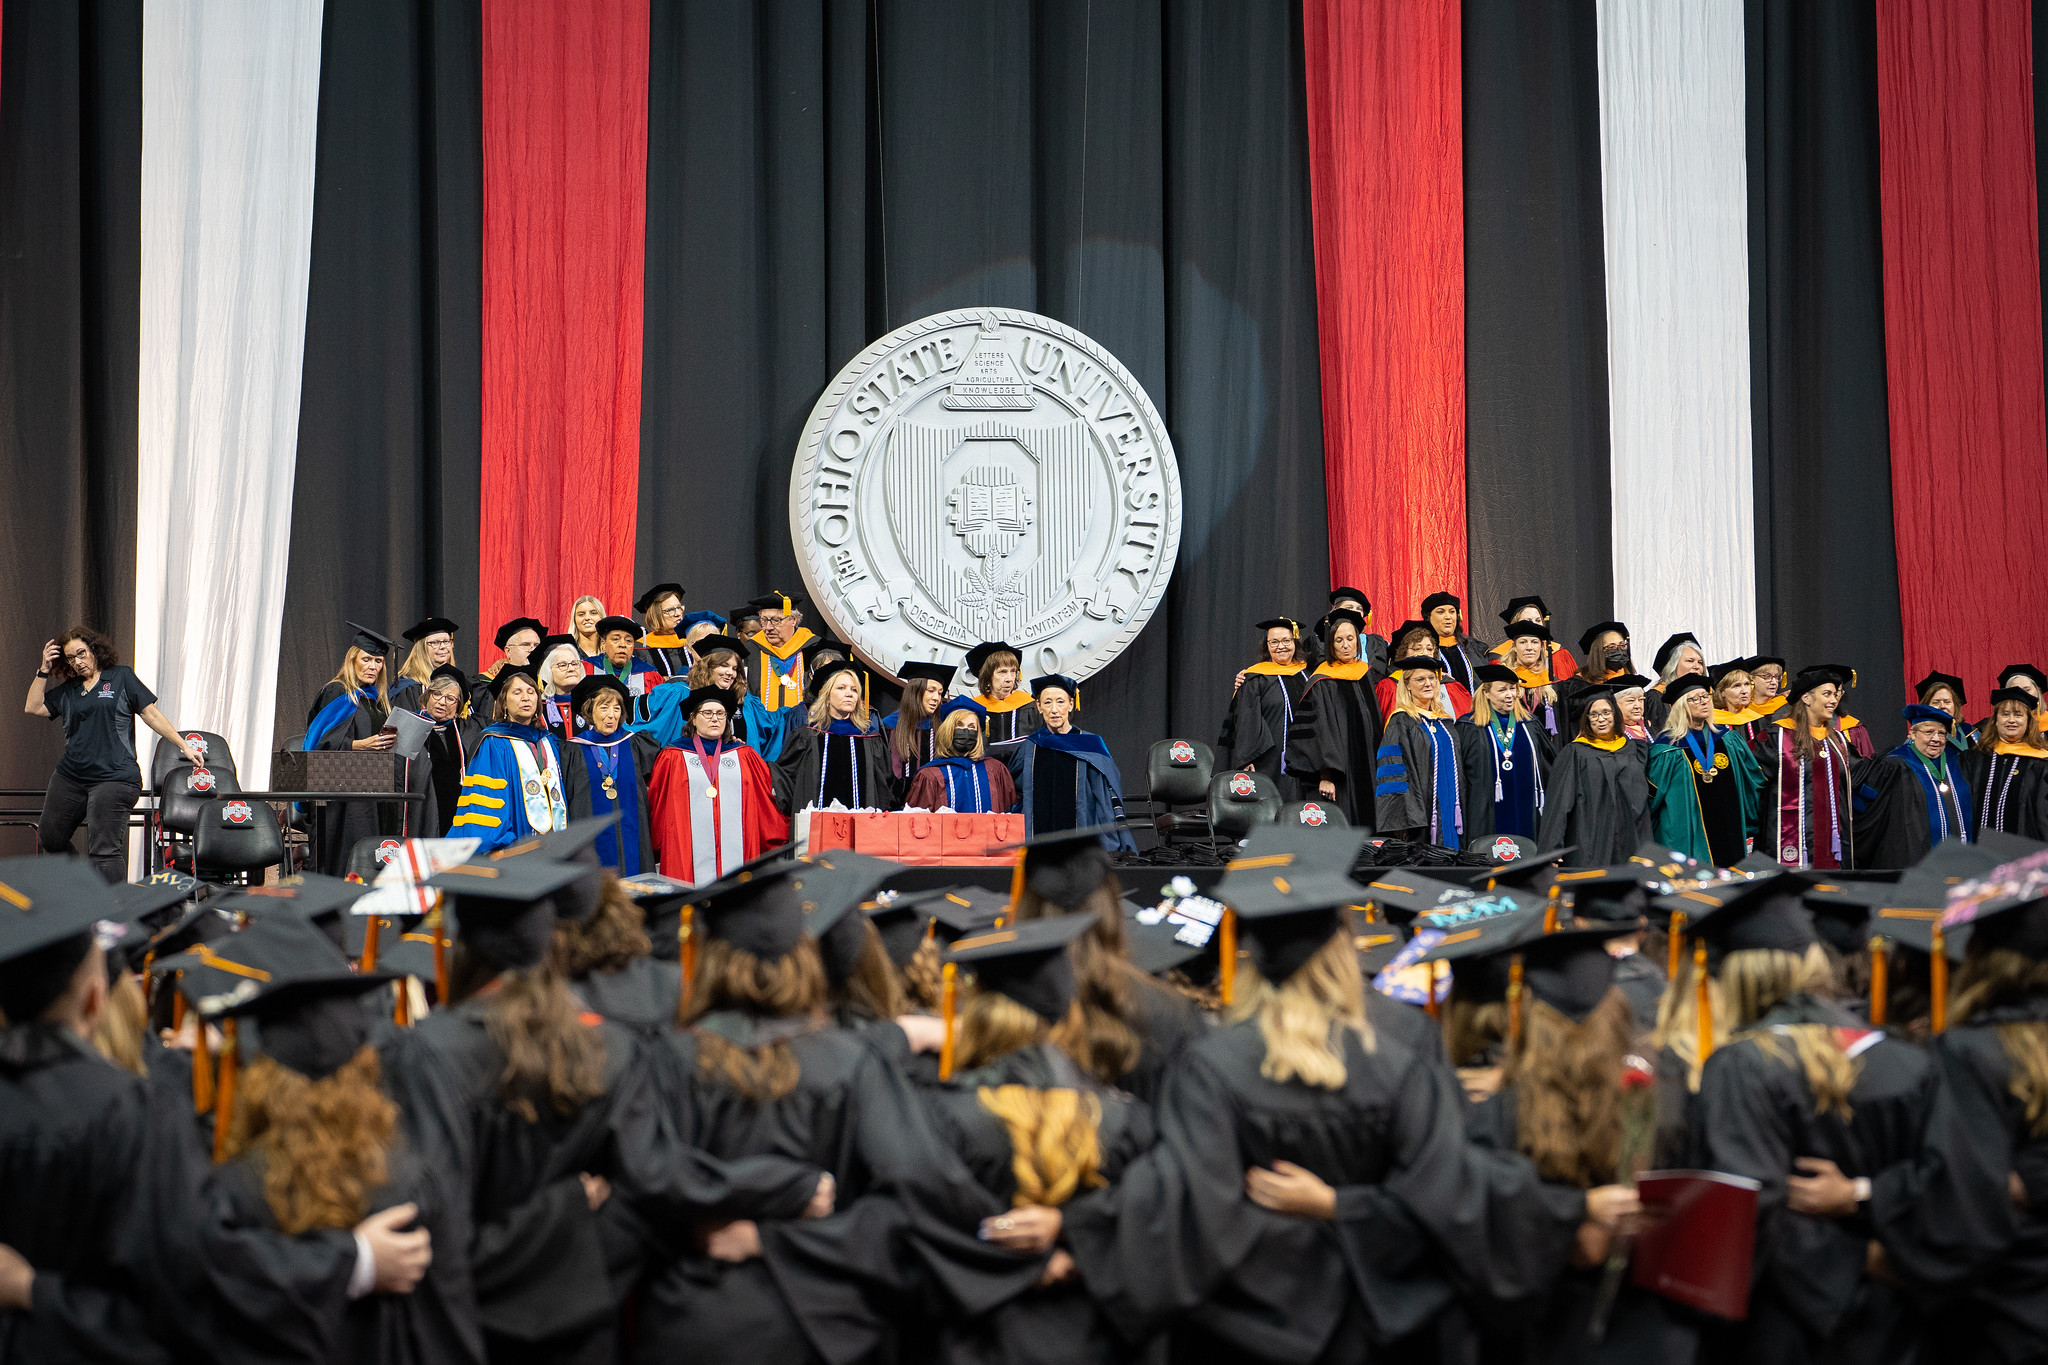 College of Nursing faculty and graduates singing Carmen Ohio at Convocation ceremony